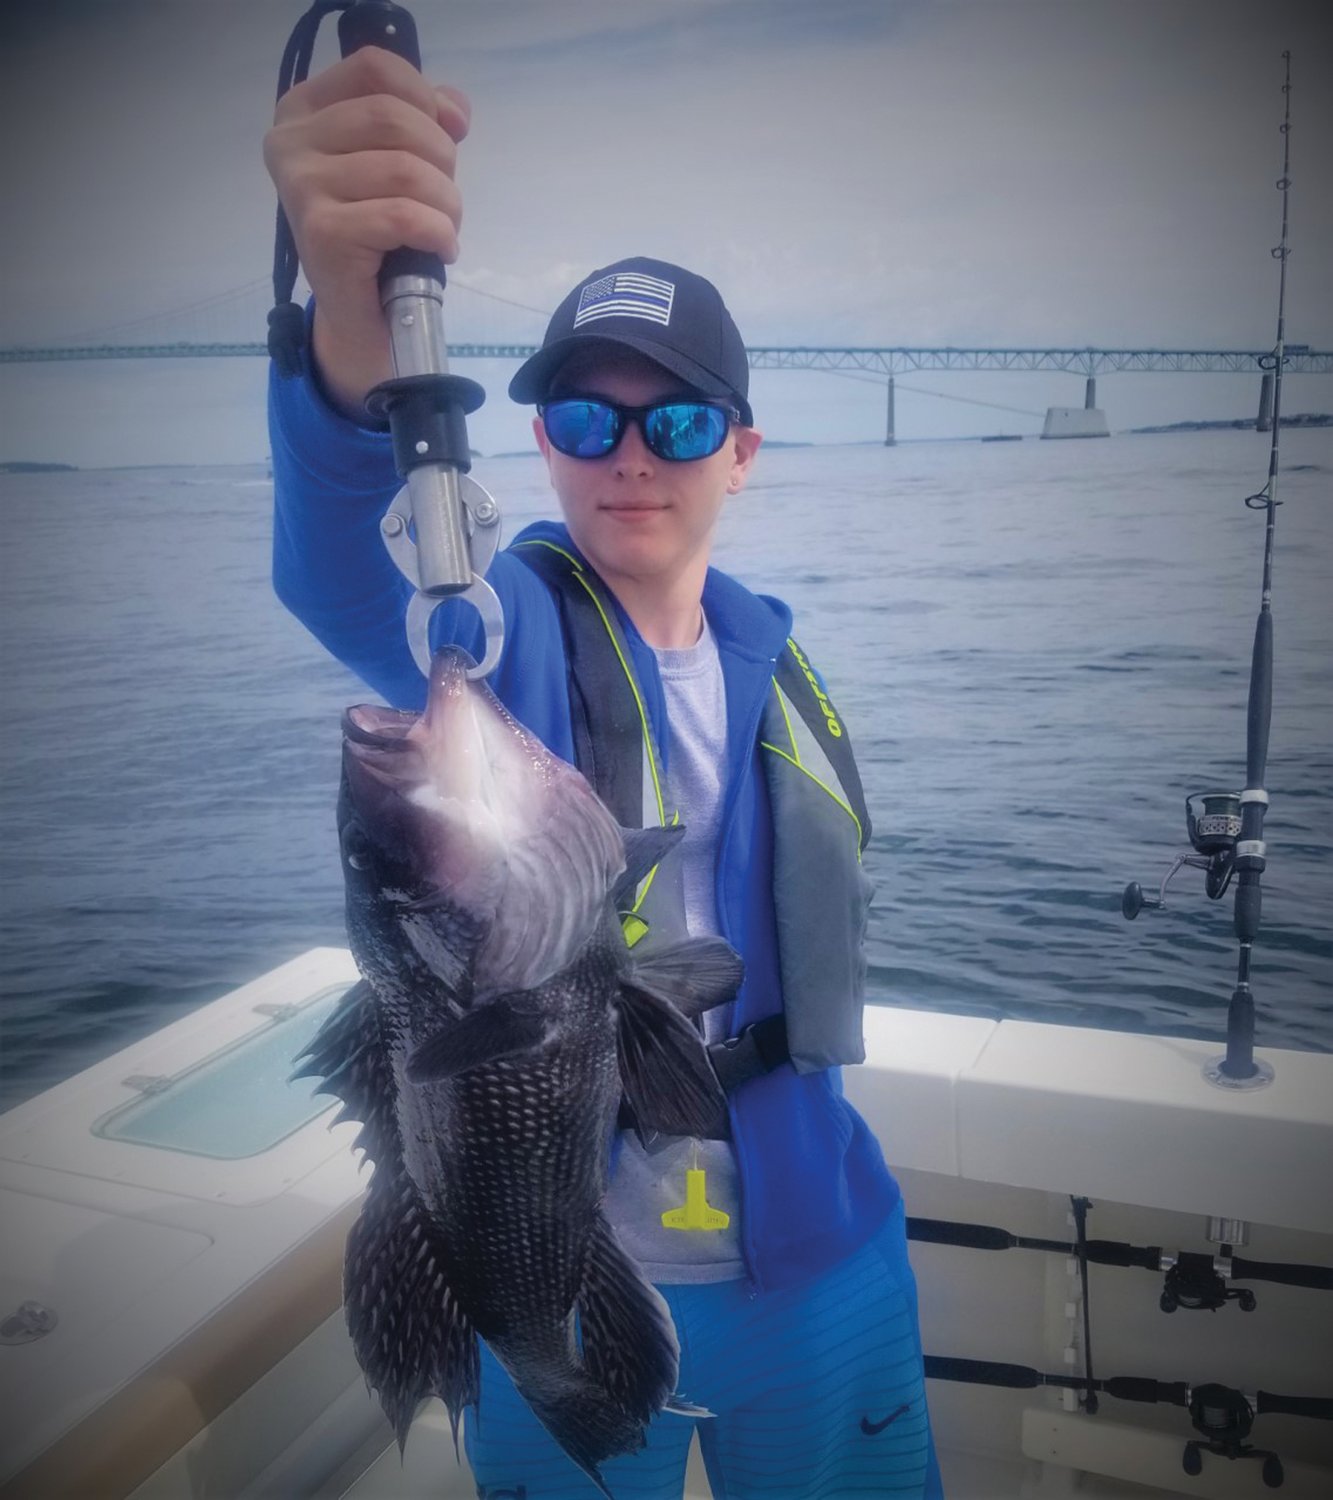 BIG CATCH: Reicher caught this 19-inch black sea bass at the Newport Bridge fishing with his grandfather Ed Jacques and his grandfather’s brother Richard Jacques.